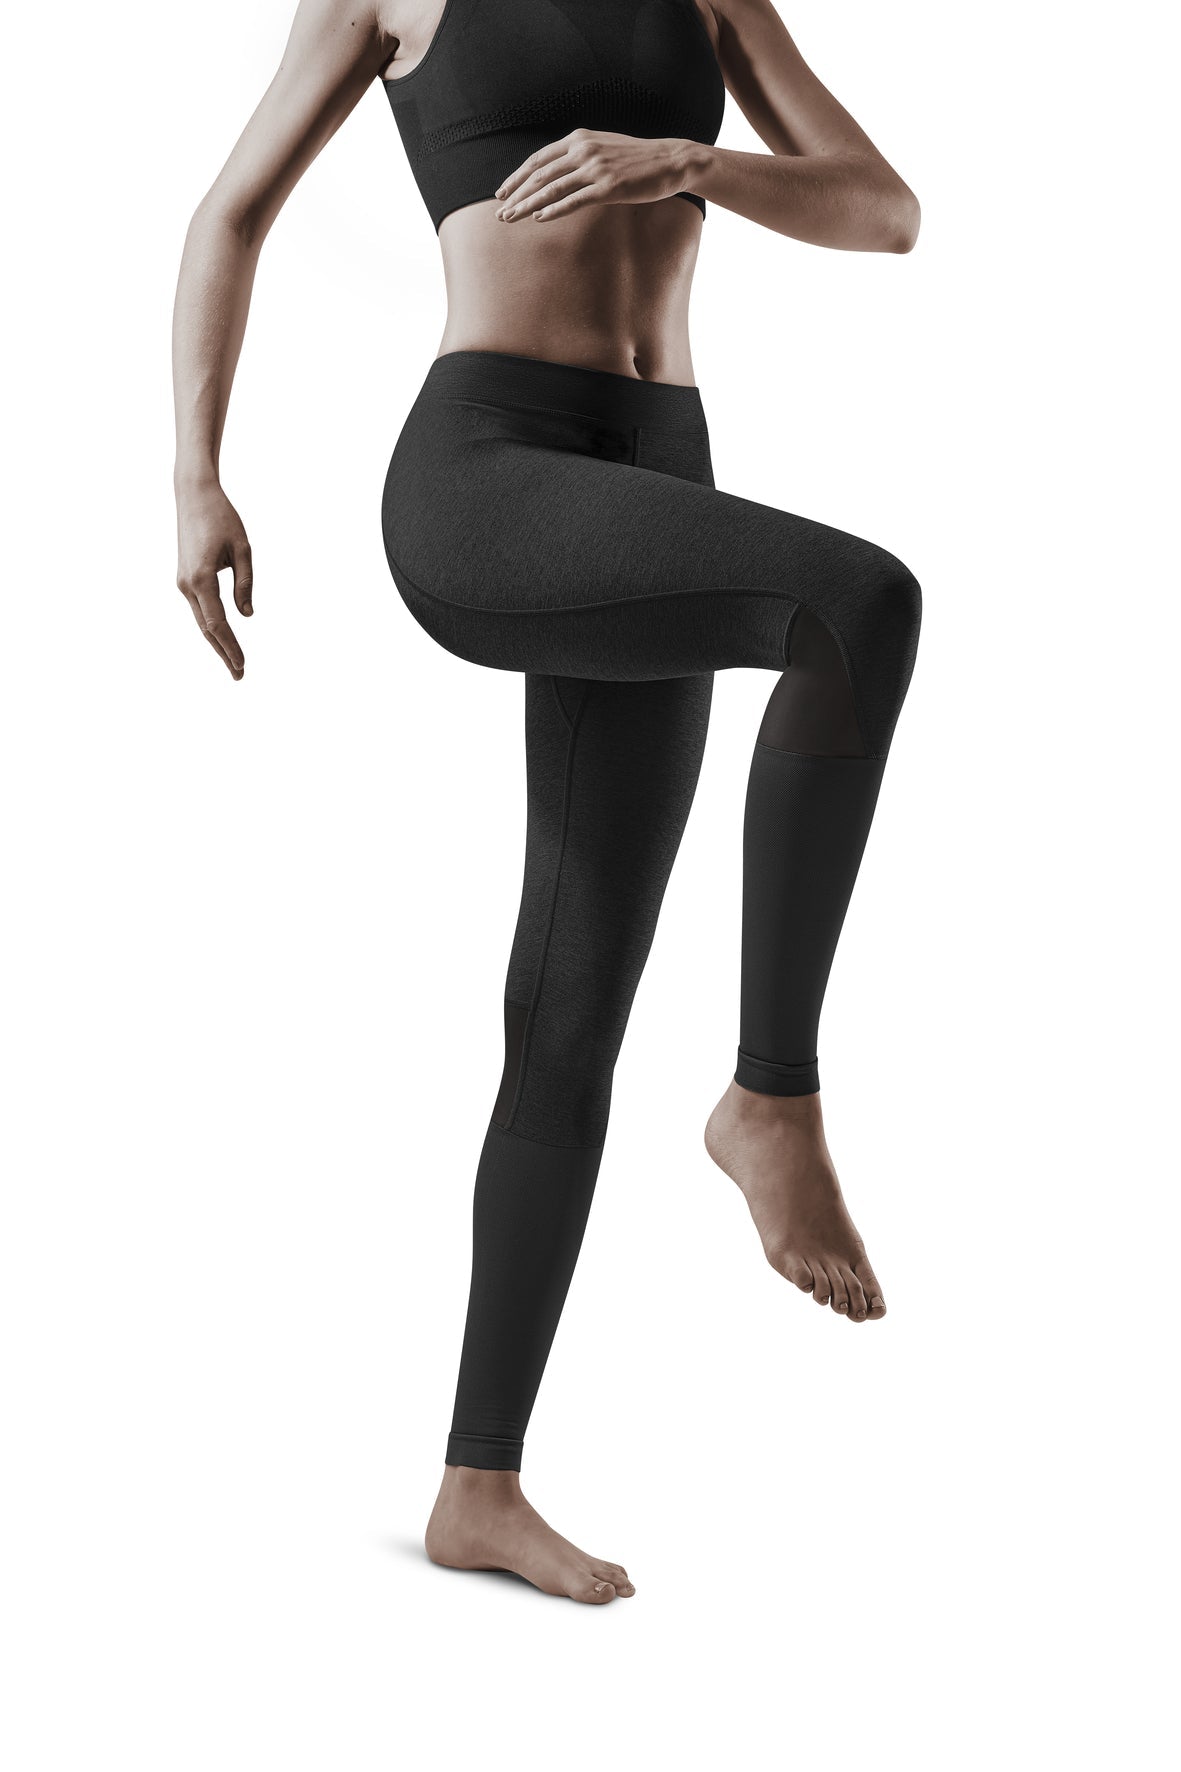 CEP Recovery+ Pro Tights – The Medical Zone